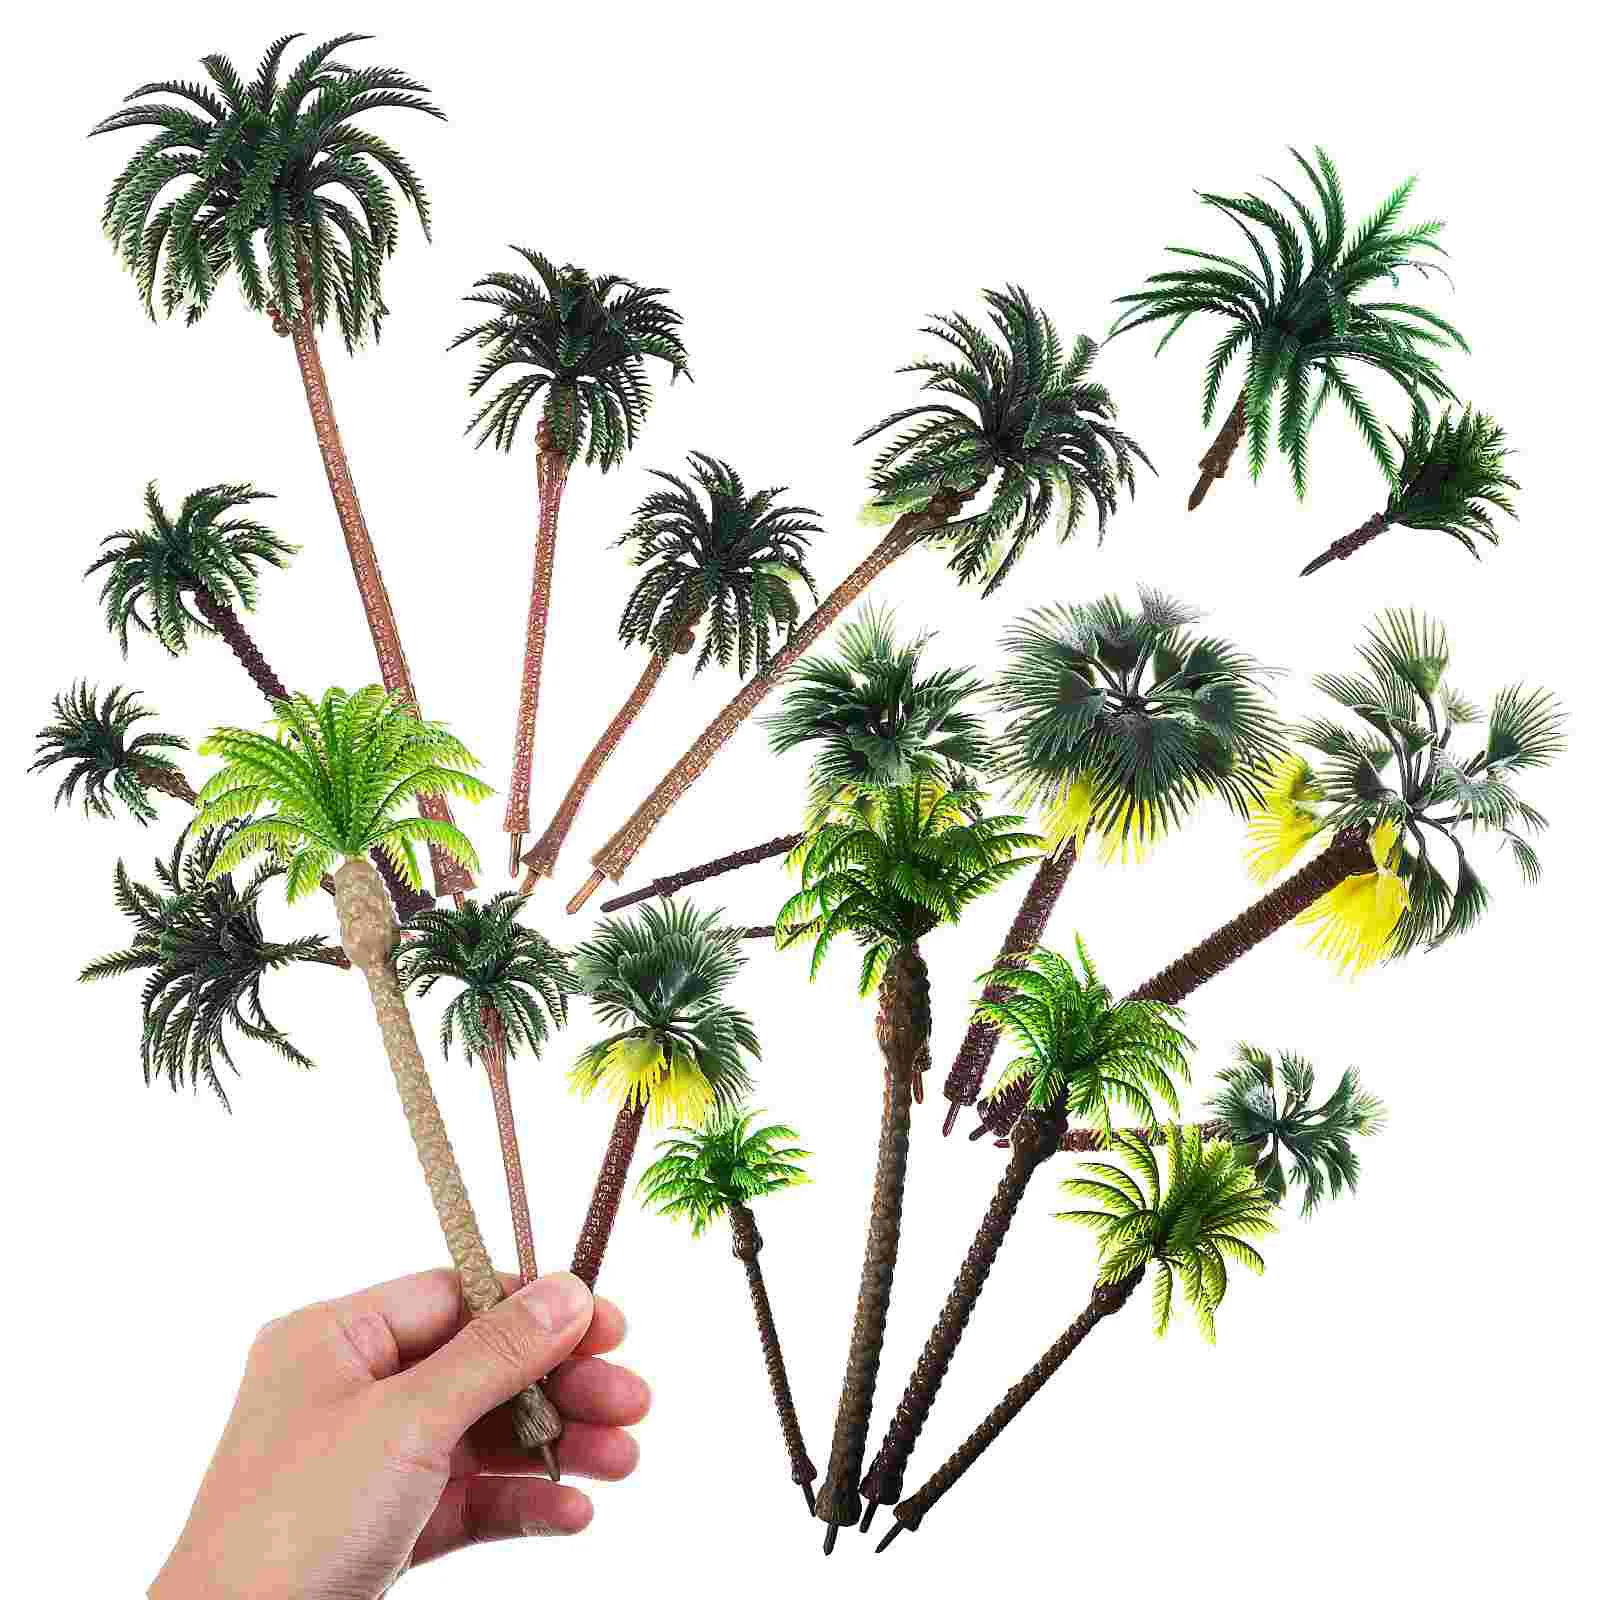 

Palm Trees Tree Mini Model Miniature Diorama Cake Toppers Crafts Topper Coconut Plastic Models Rainforest Artificial Decoration